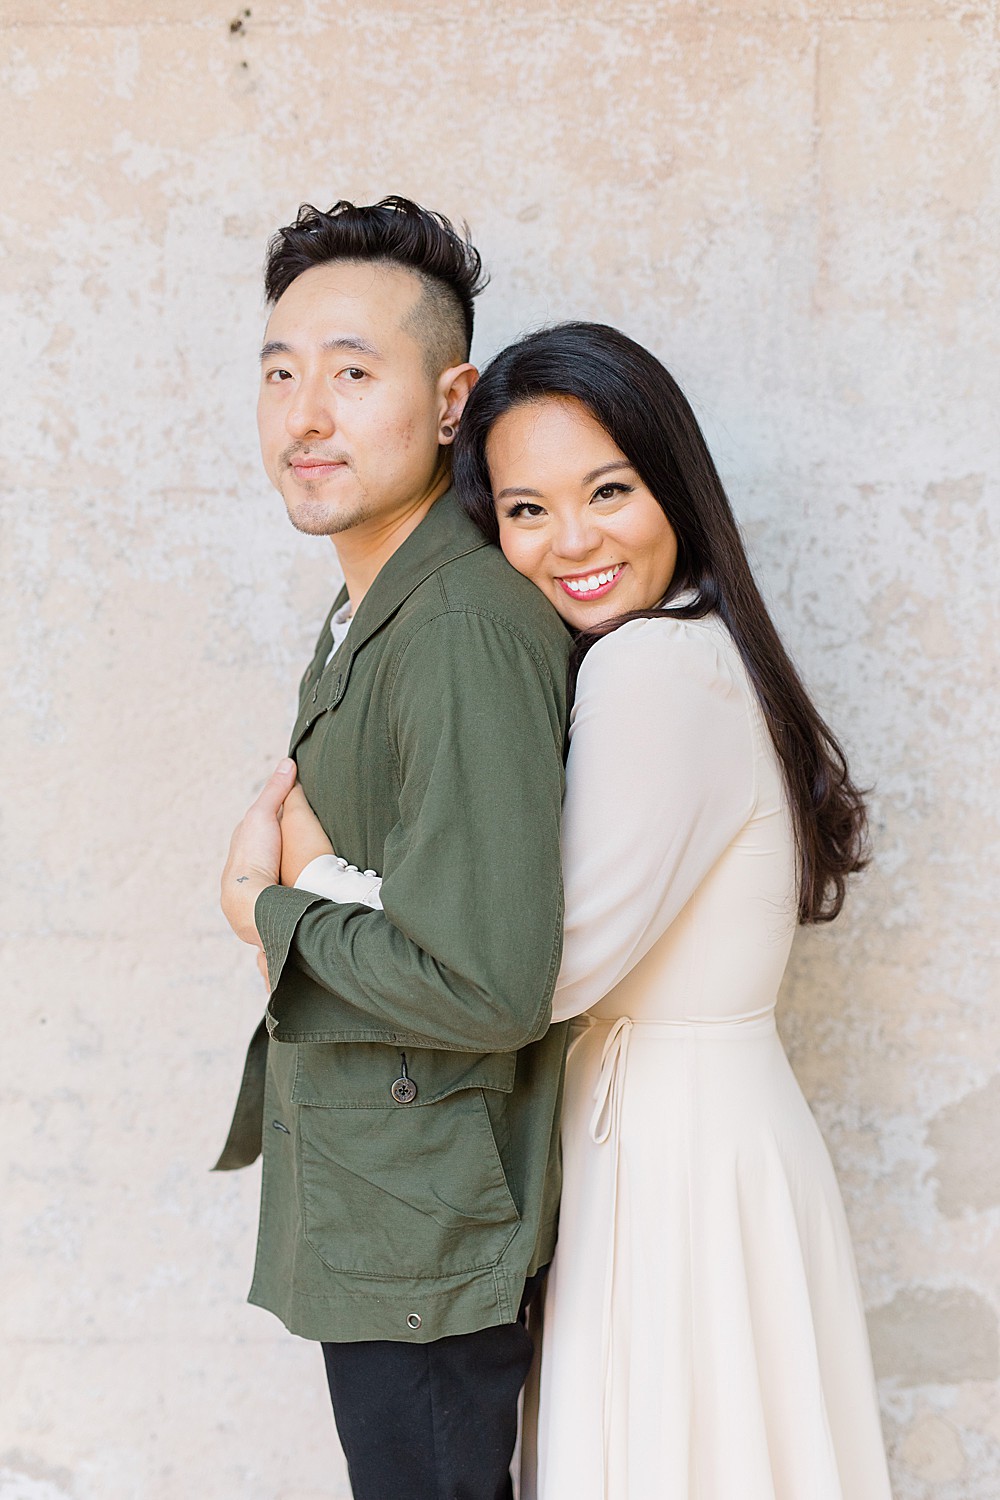 couples portrait from an engagement session in Savannah